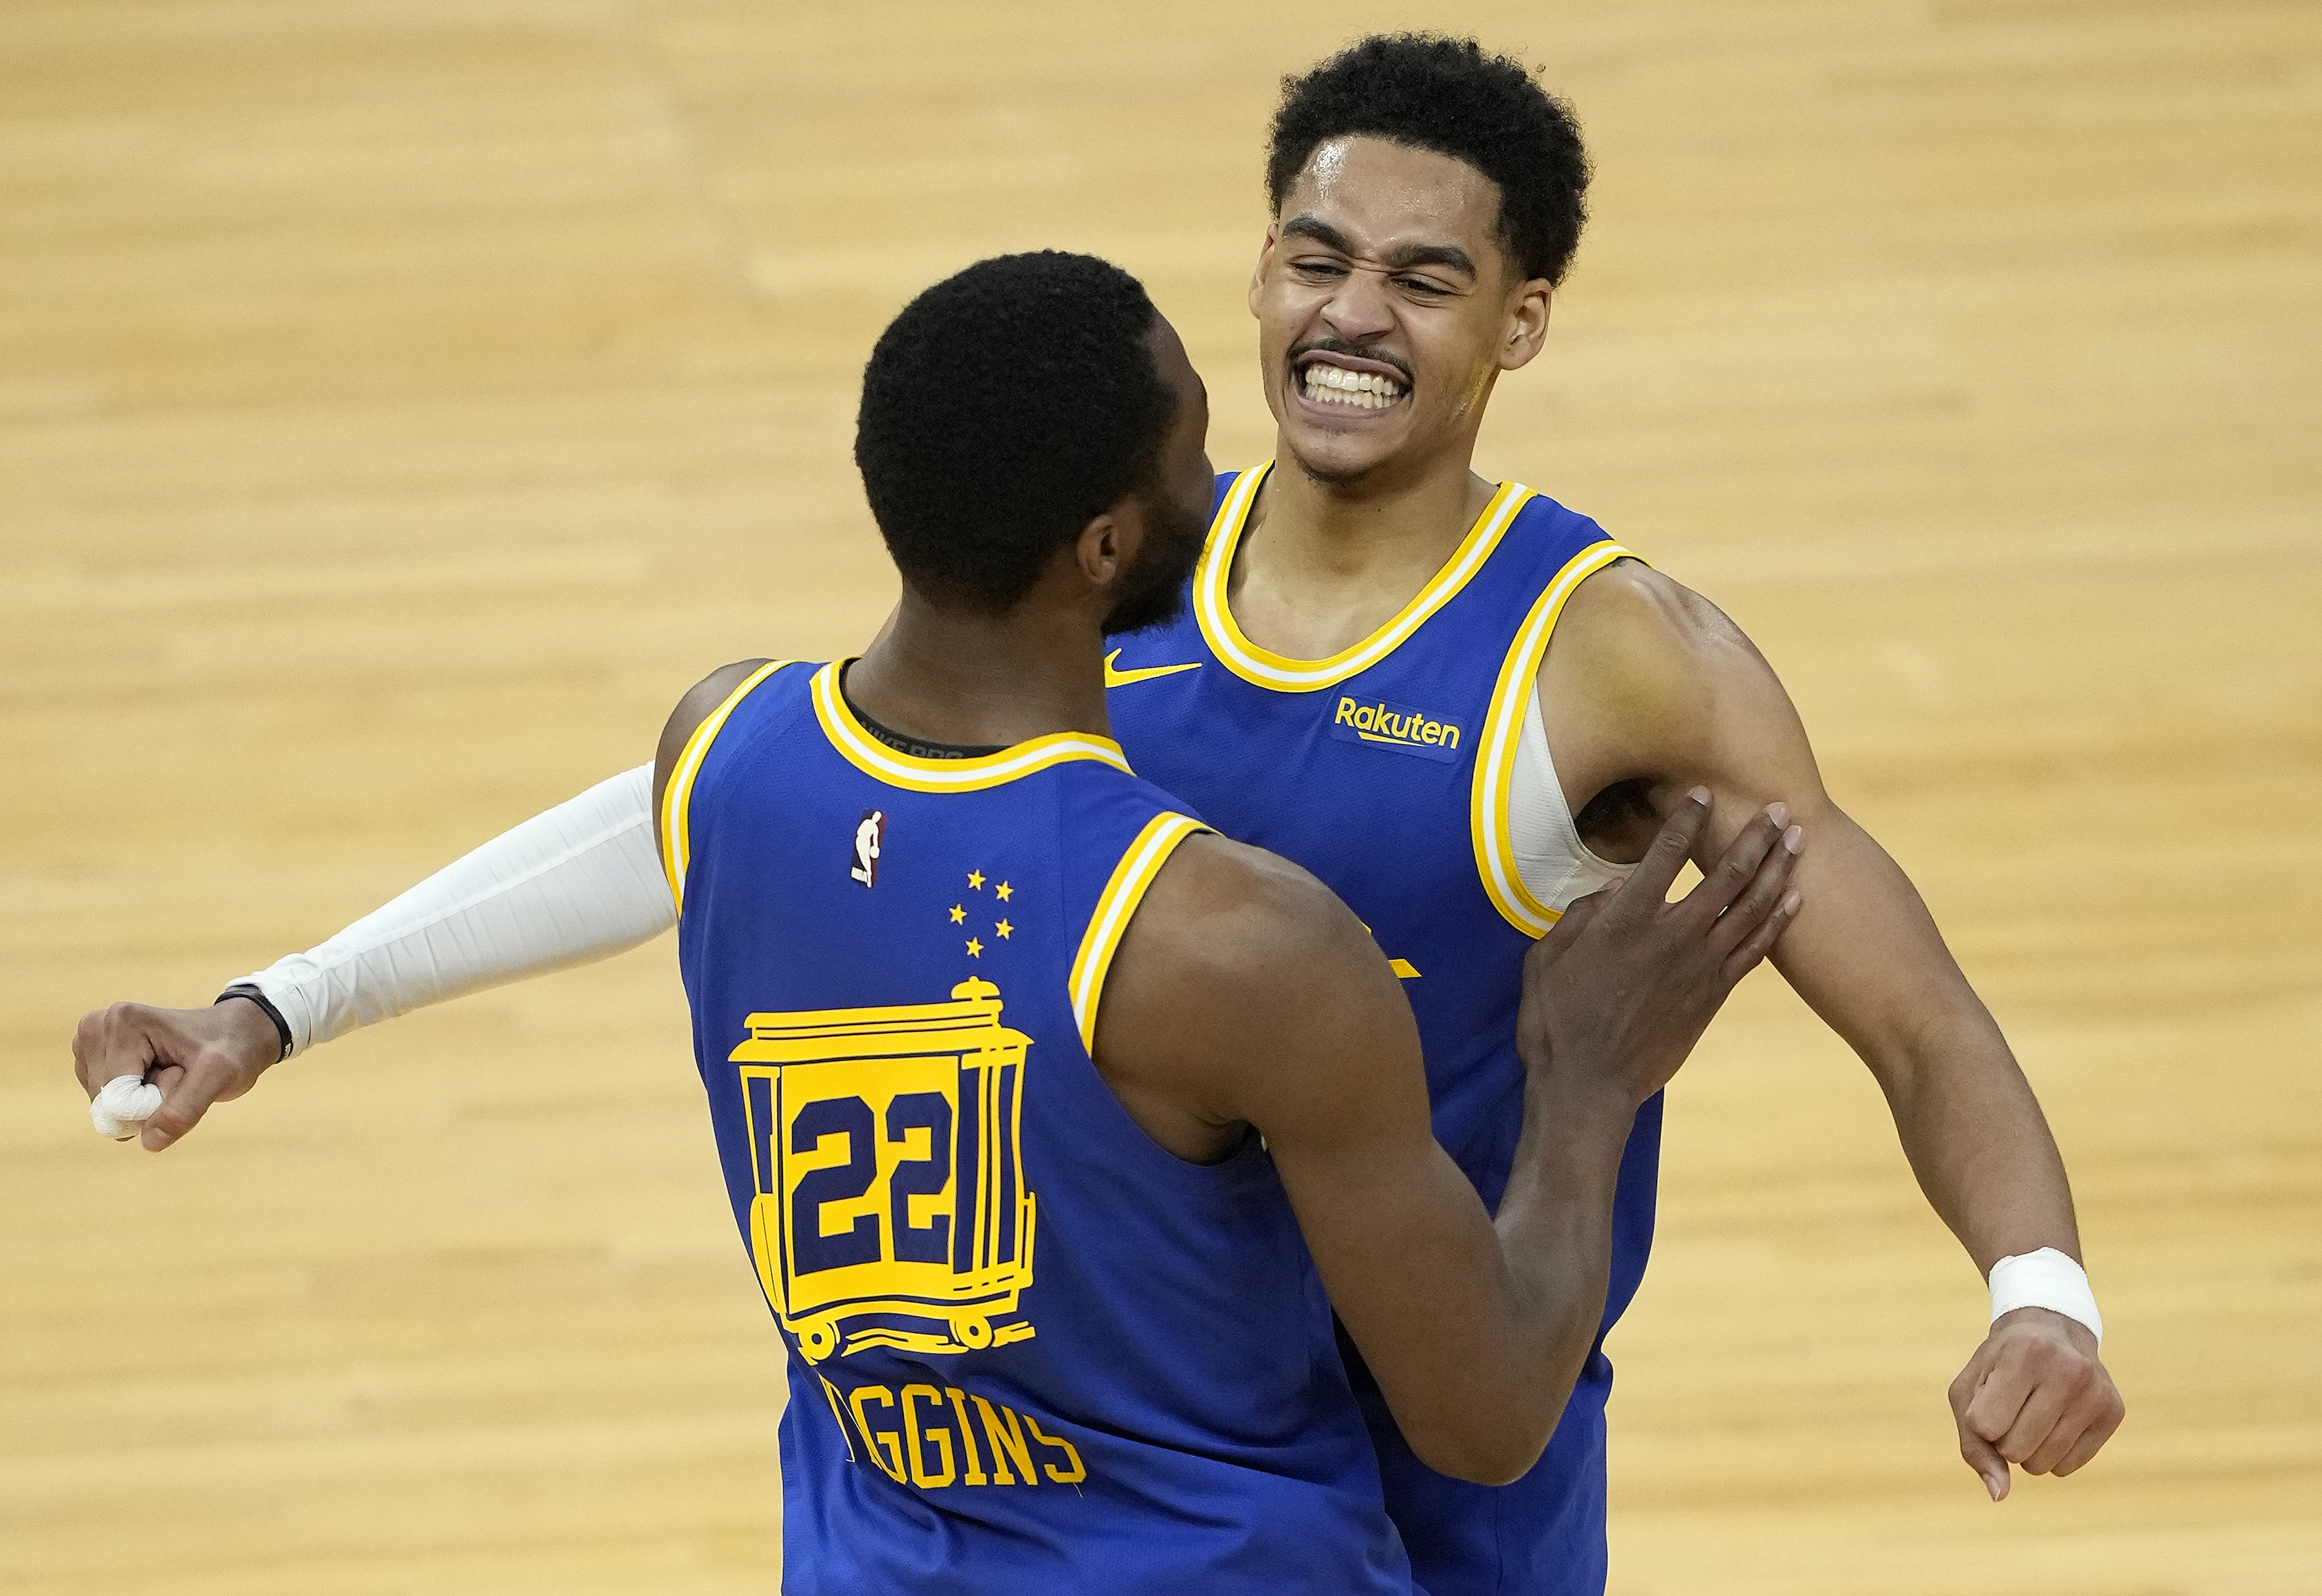 Golden State Warriors wings Andrew Wiggins (22) and Jordan Poole (3) celebrate during an NBA game in May 2021